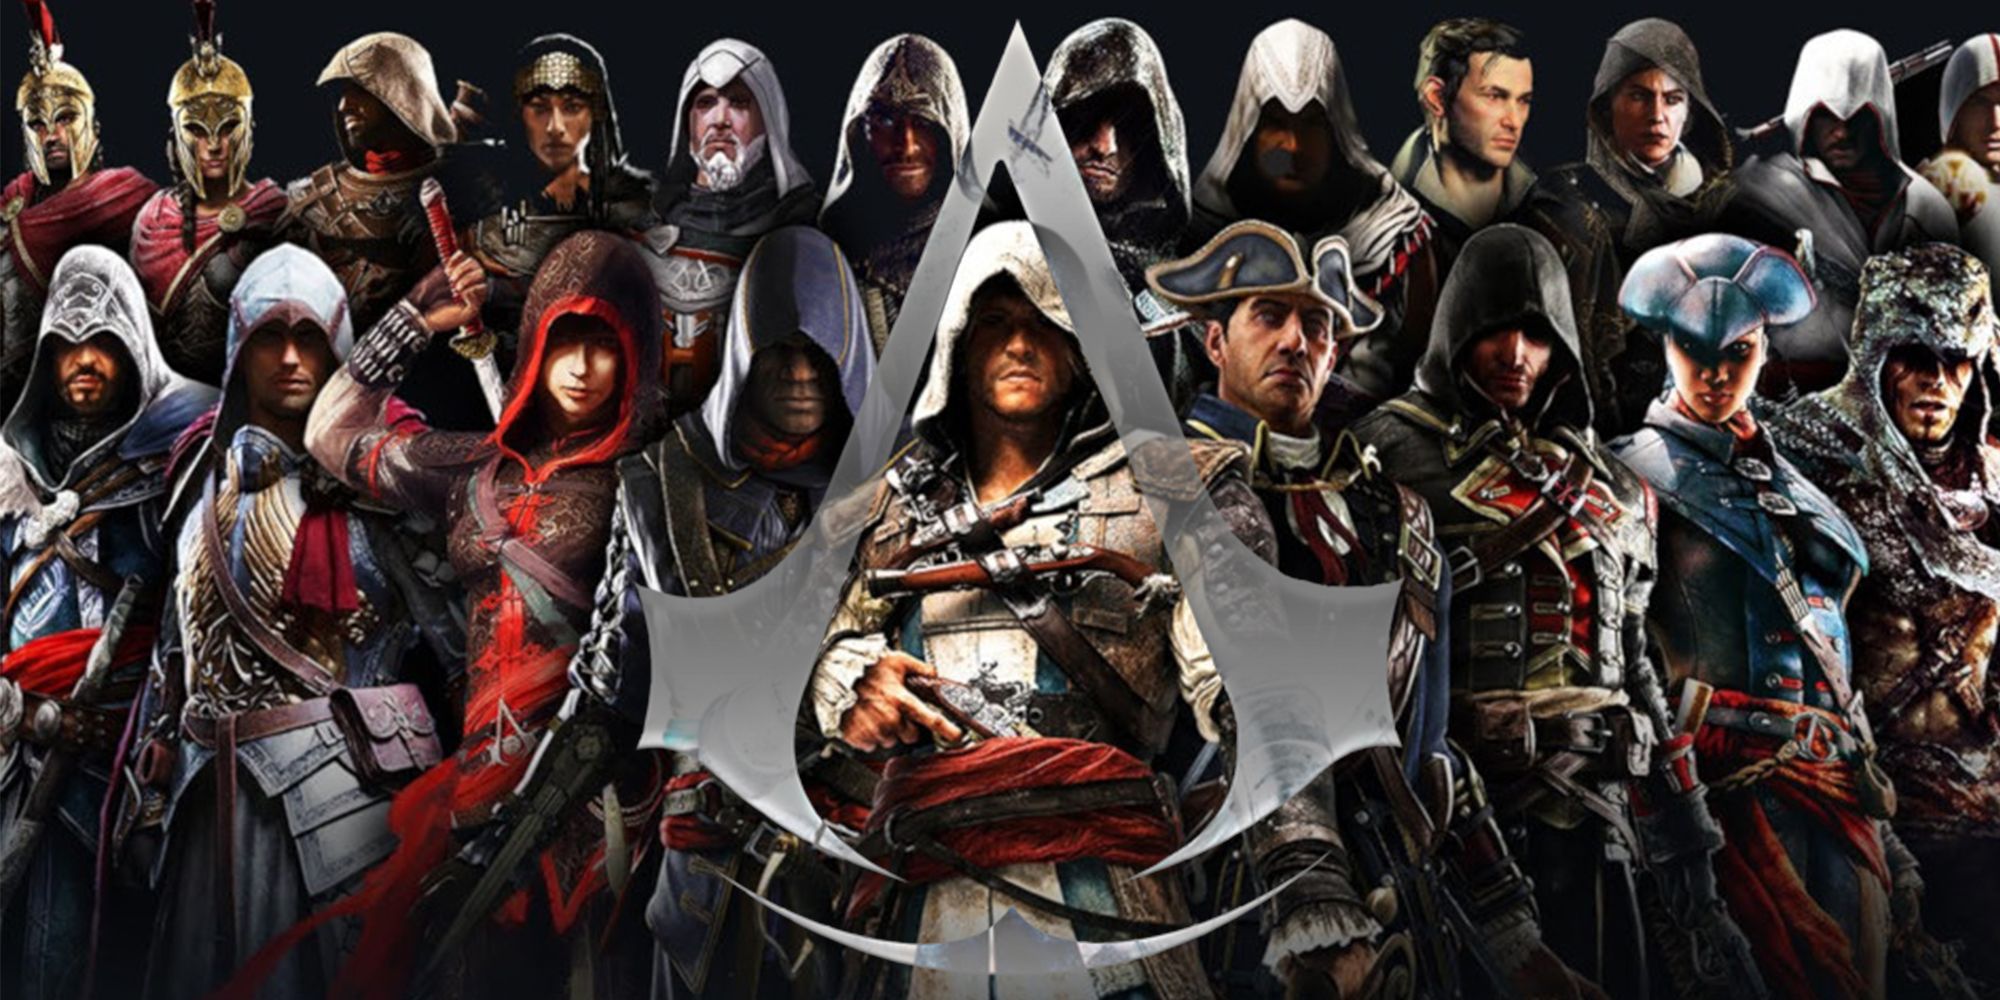 Ubisoft Reveals Live-Service Assassin's Creed Game Infinity